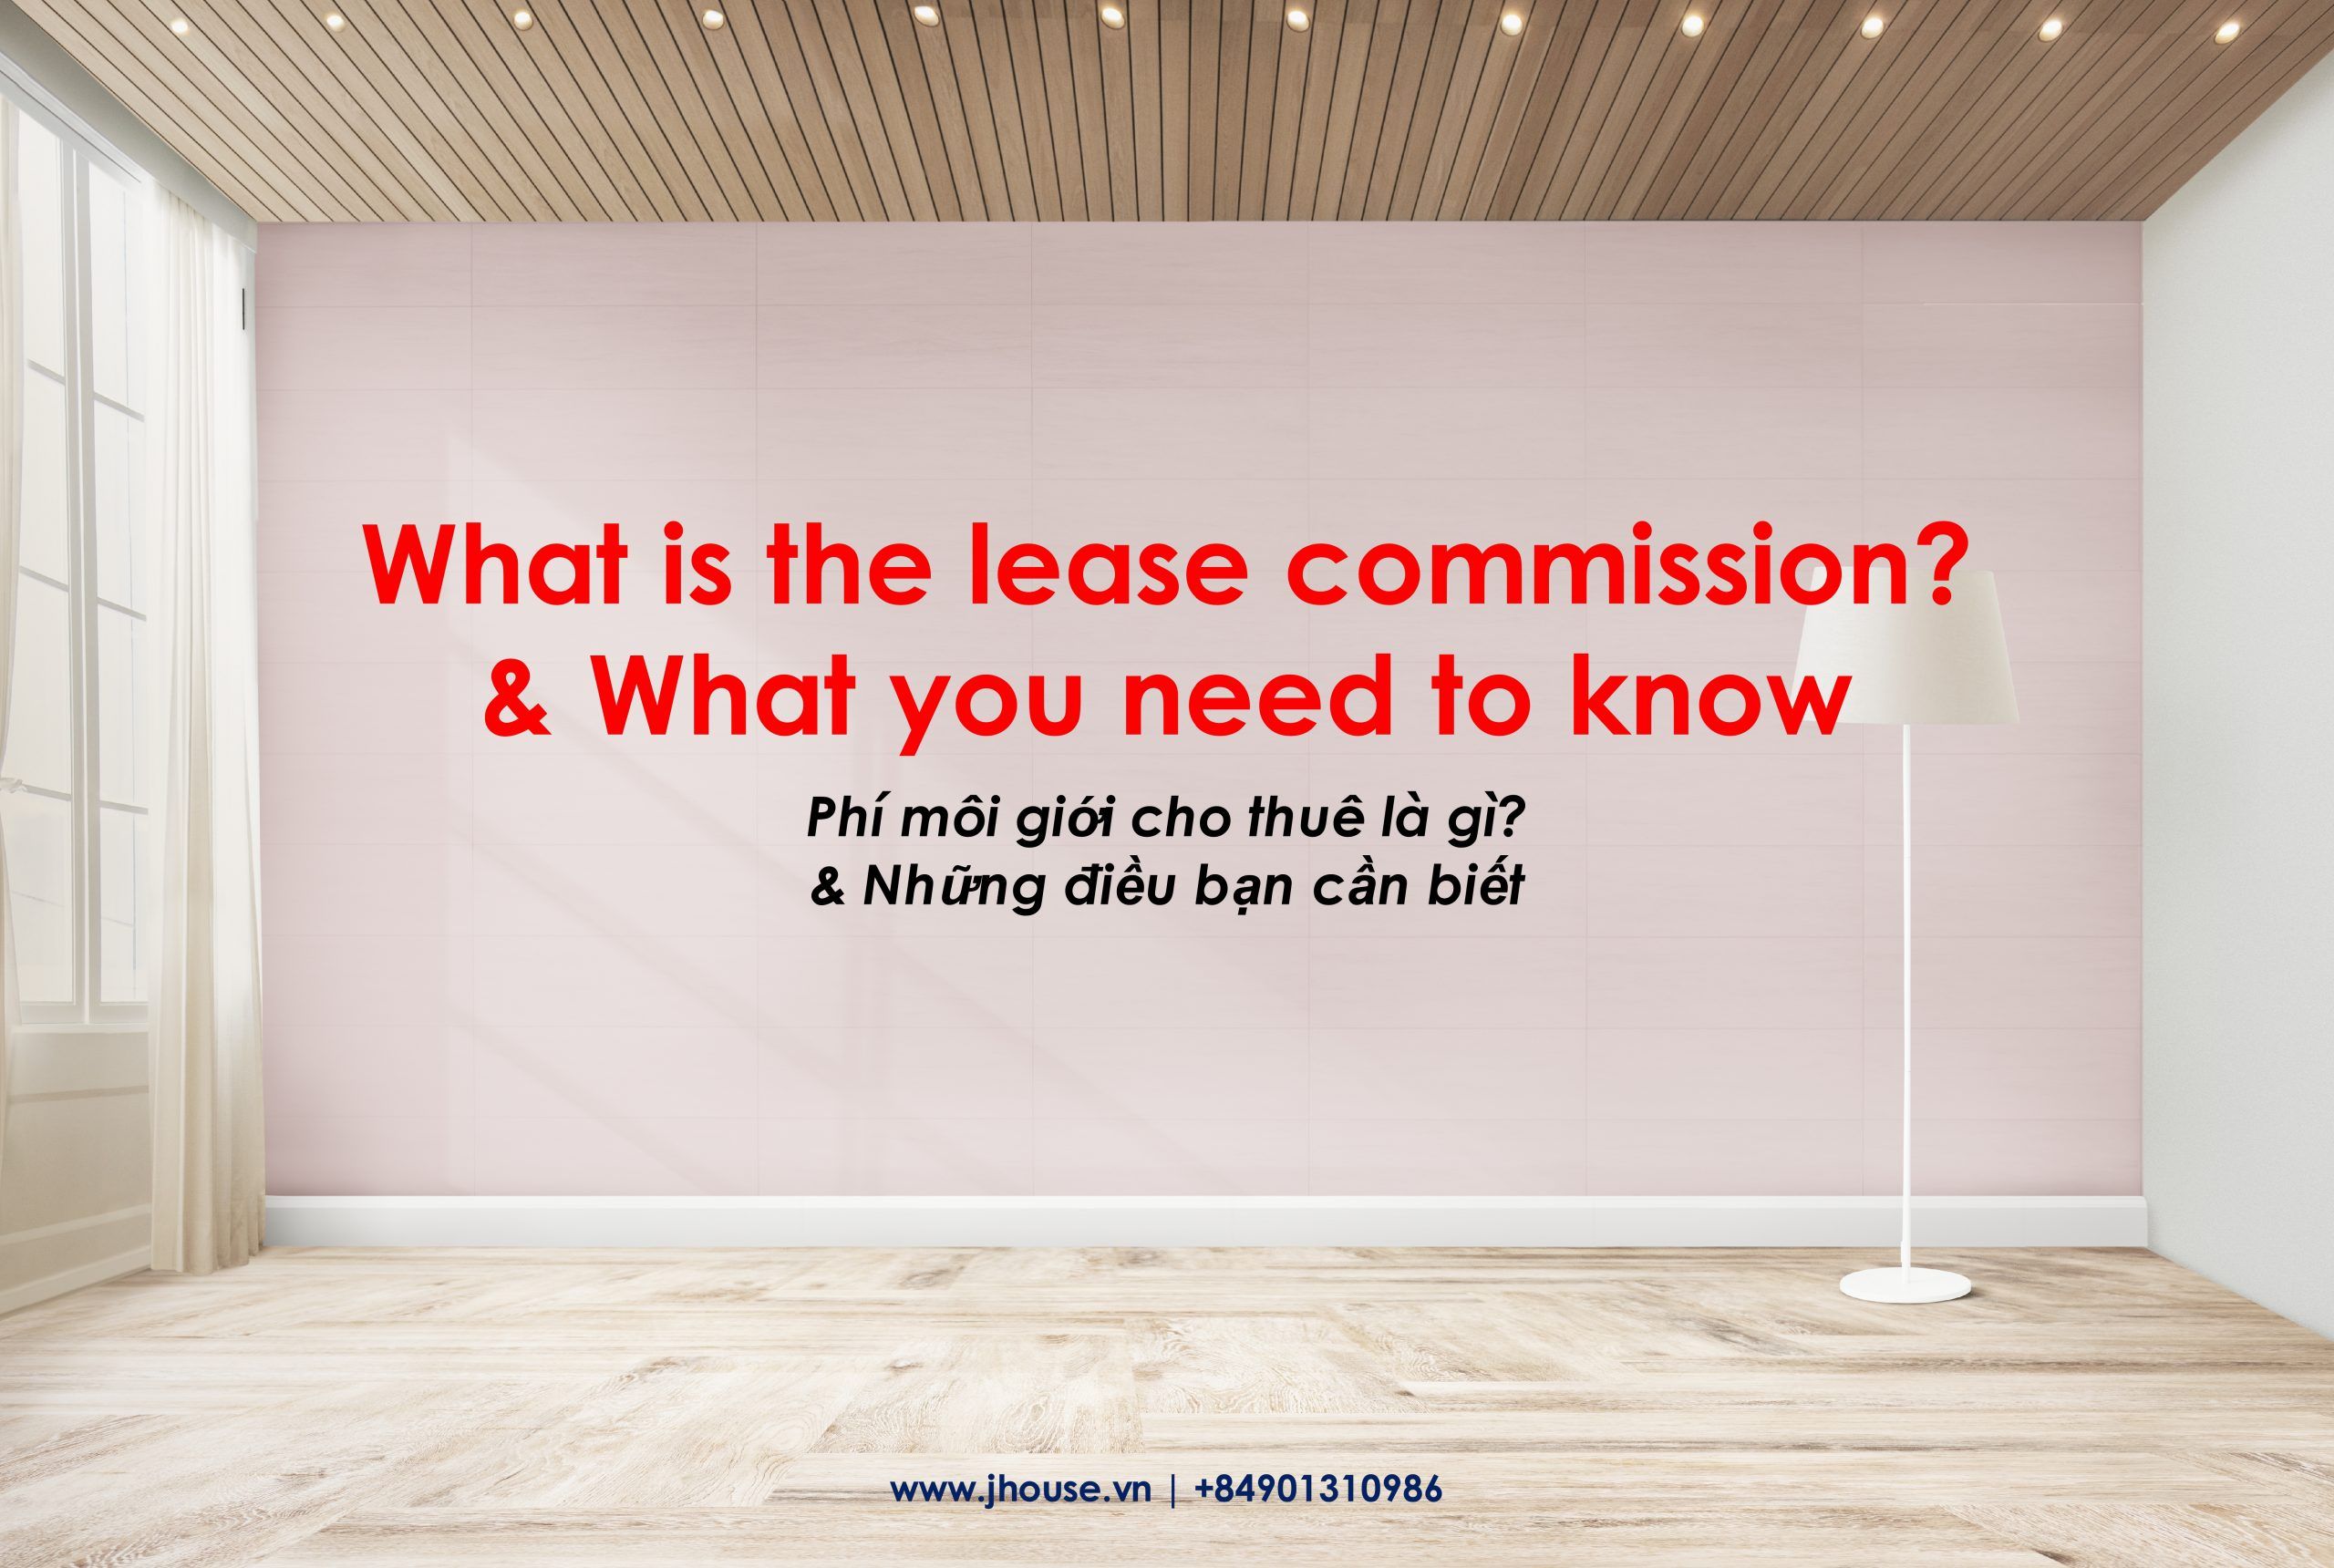 What is the lease commission JHouse scaled